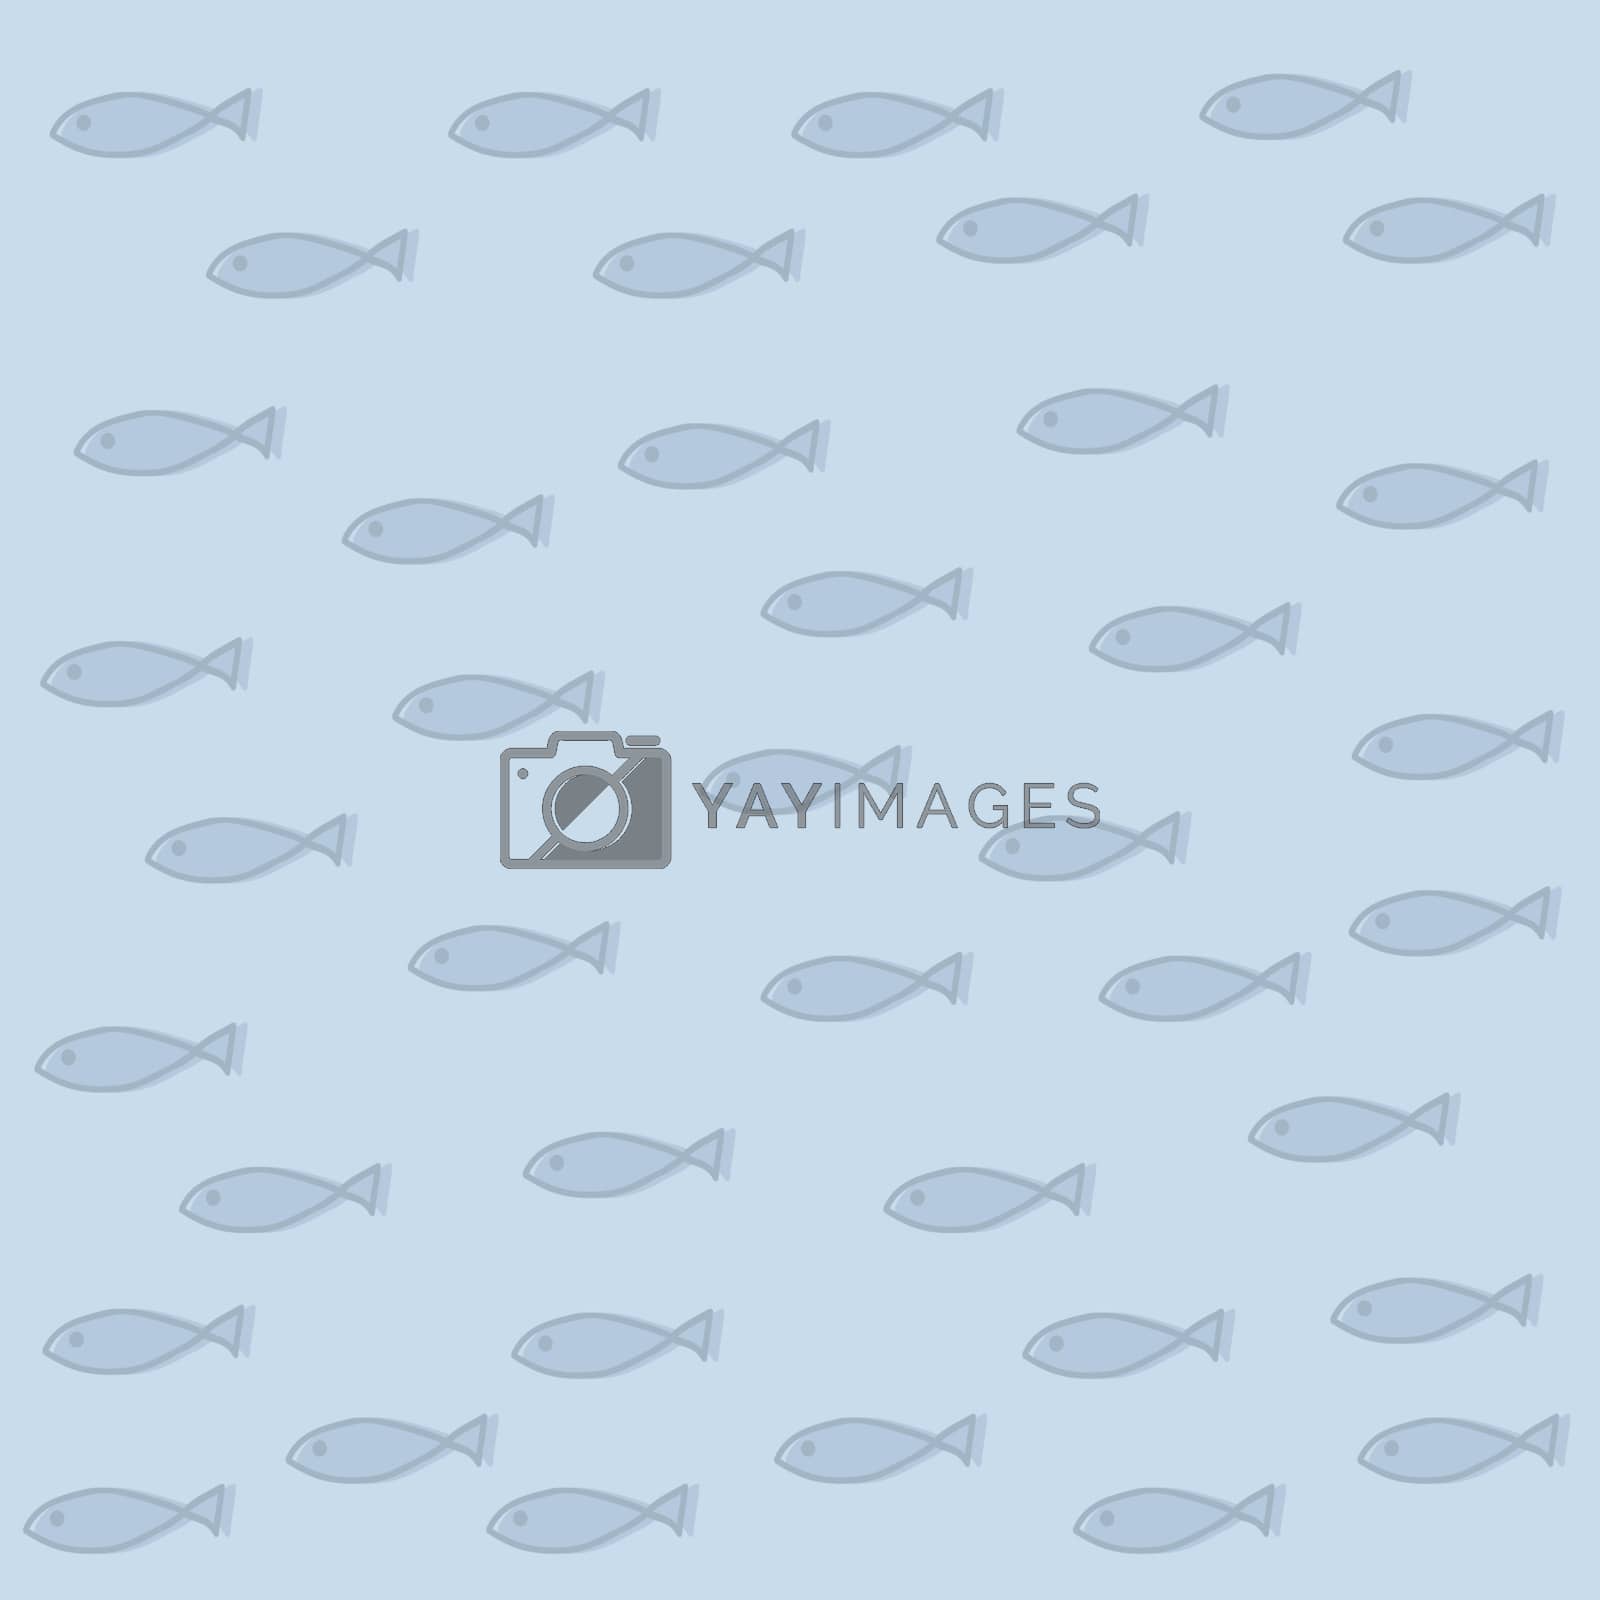 Royalty free image of fun background texture with fish by balasoiu